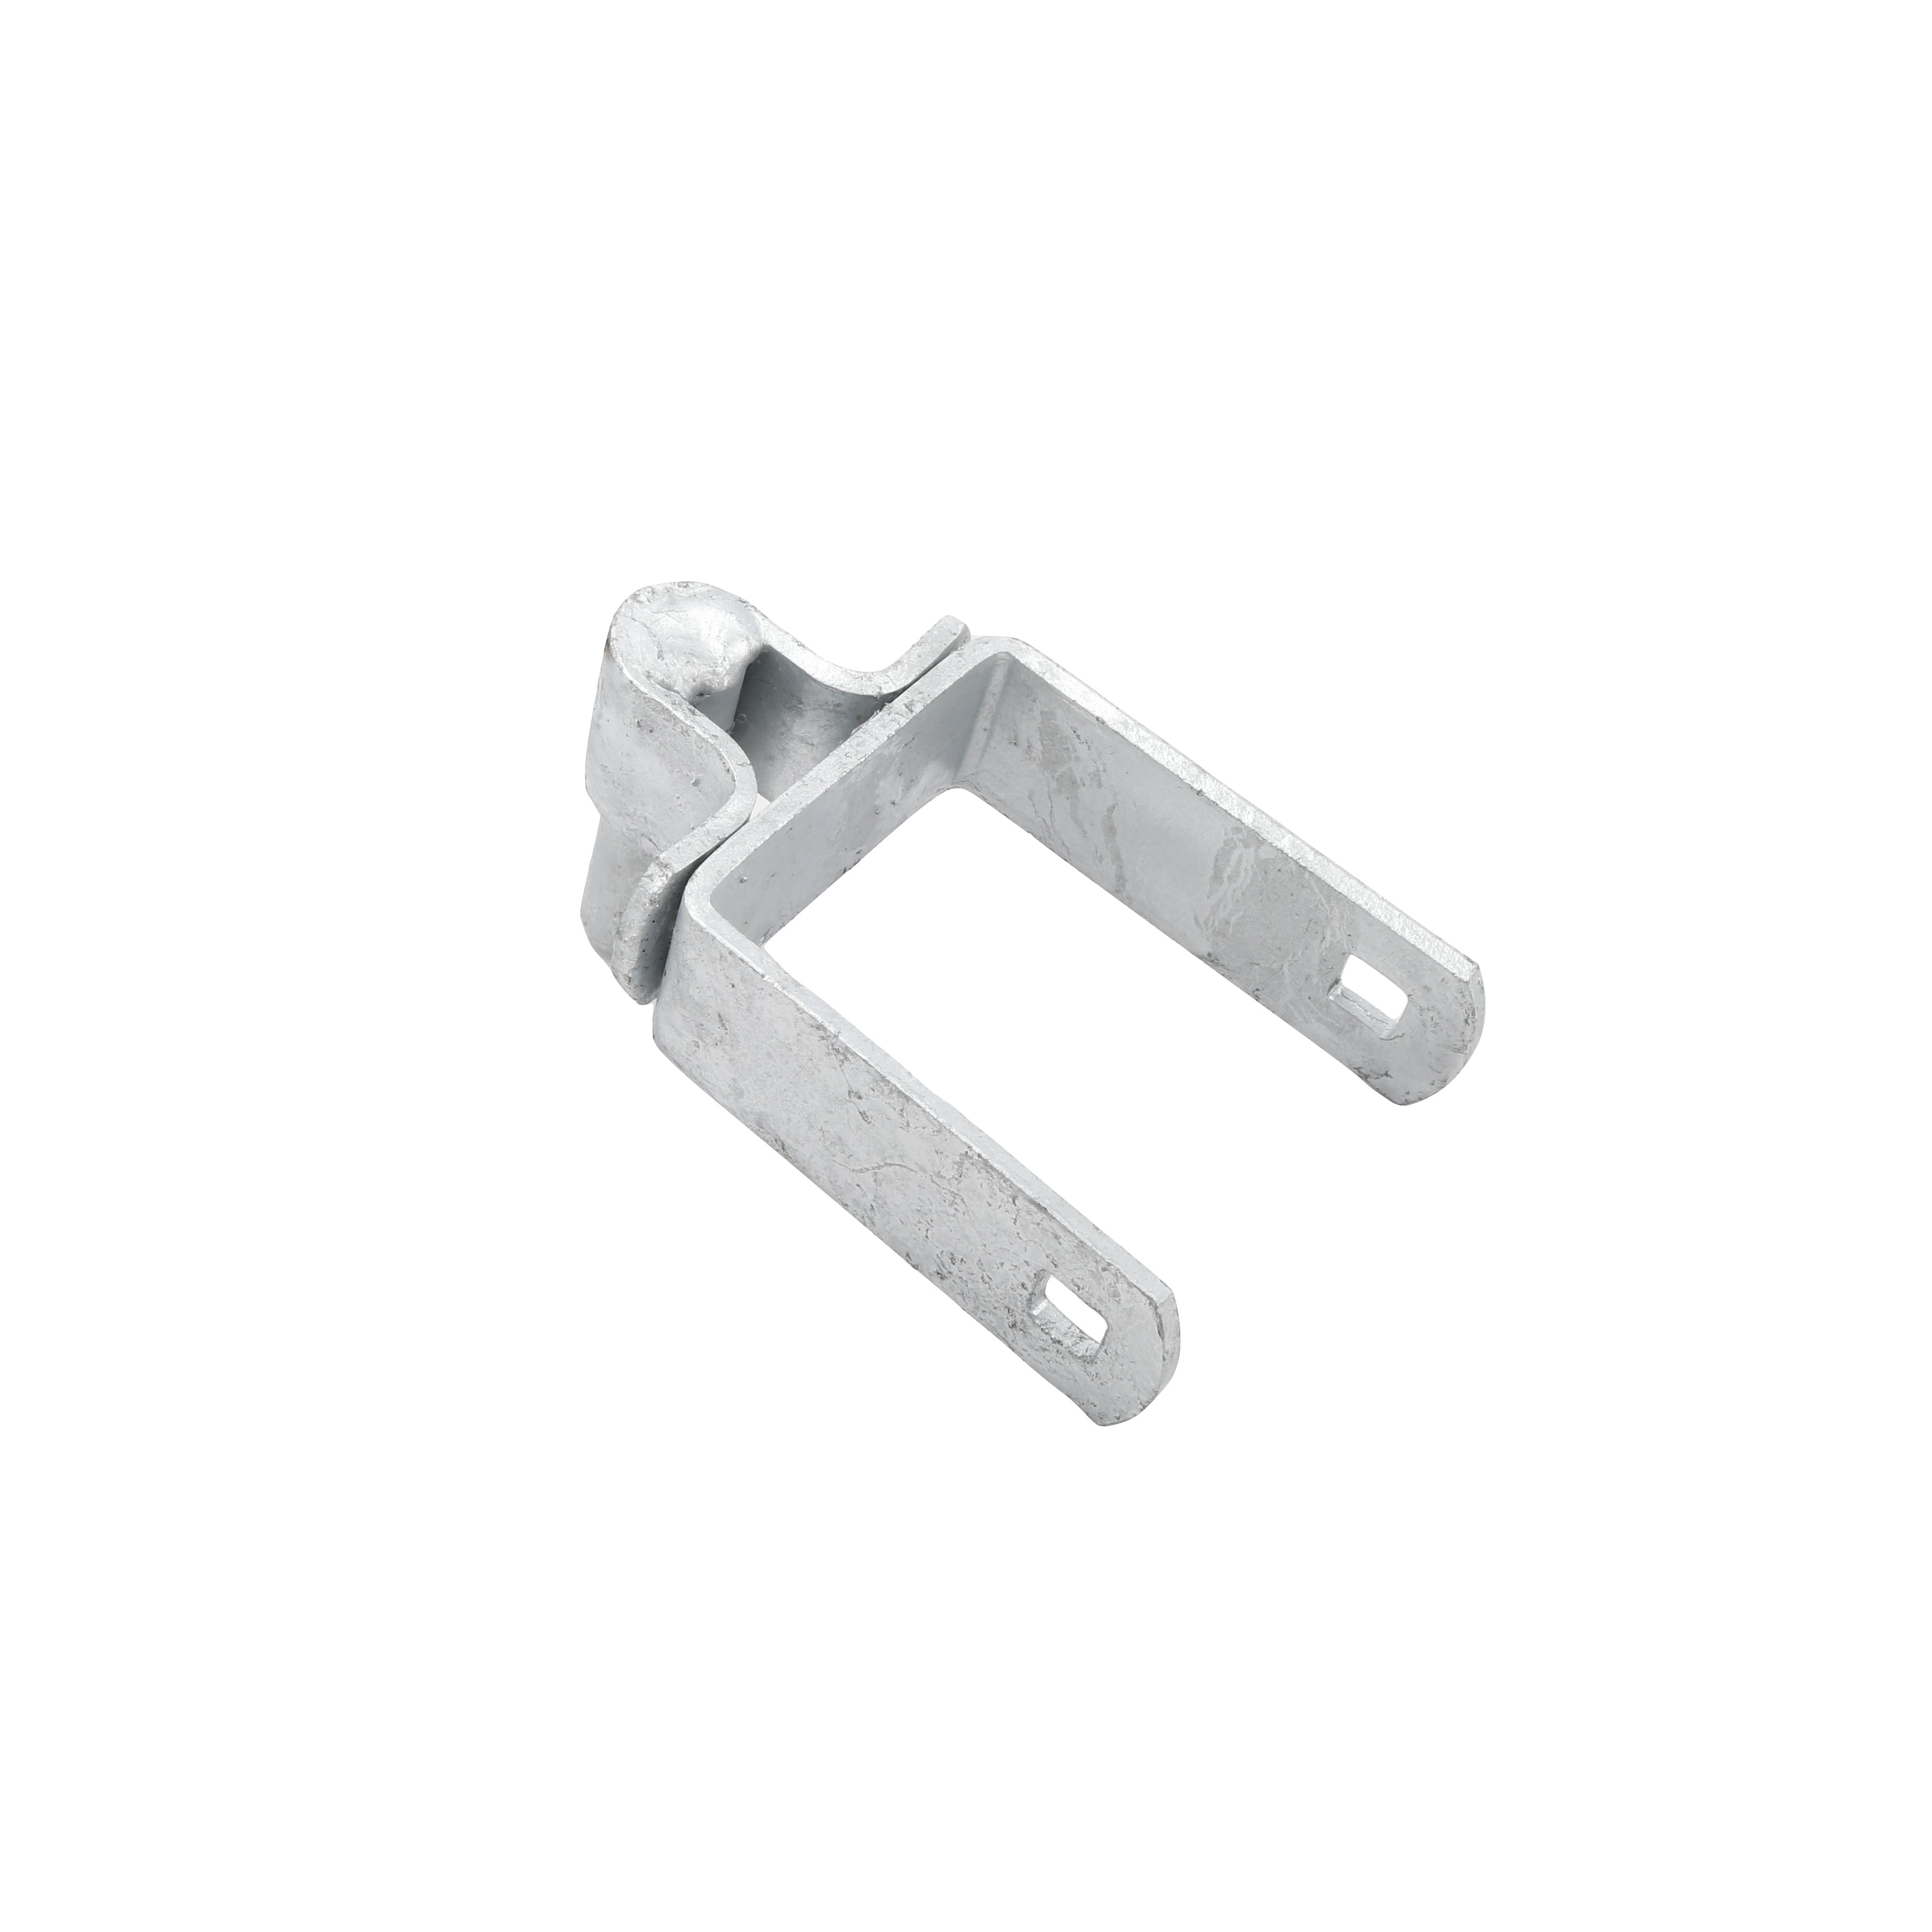 2 1/2 X 2 1/2 Square Male Gate Post Hinge Chain Link Galvanized Steel (5/8 Pintle)